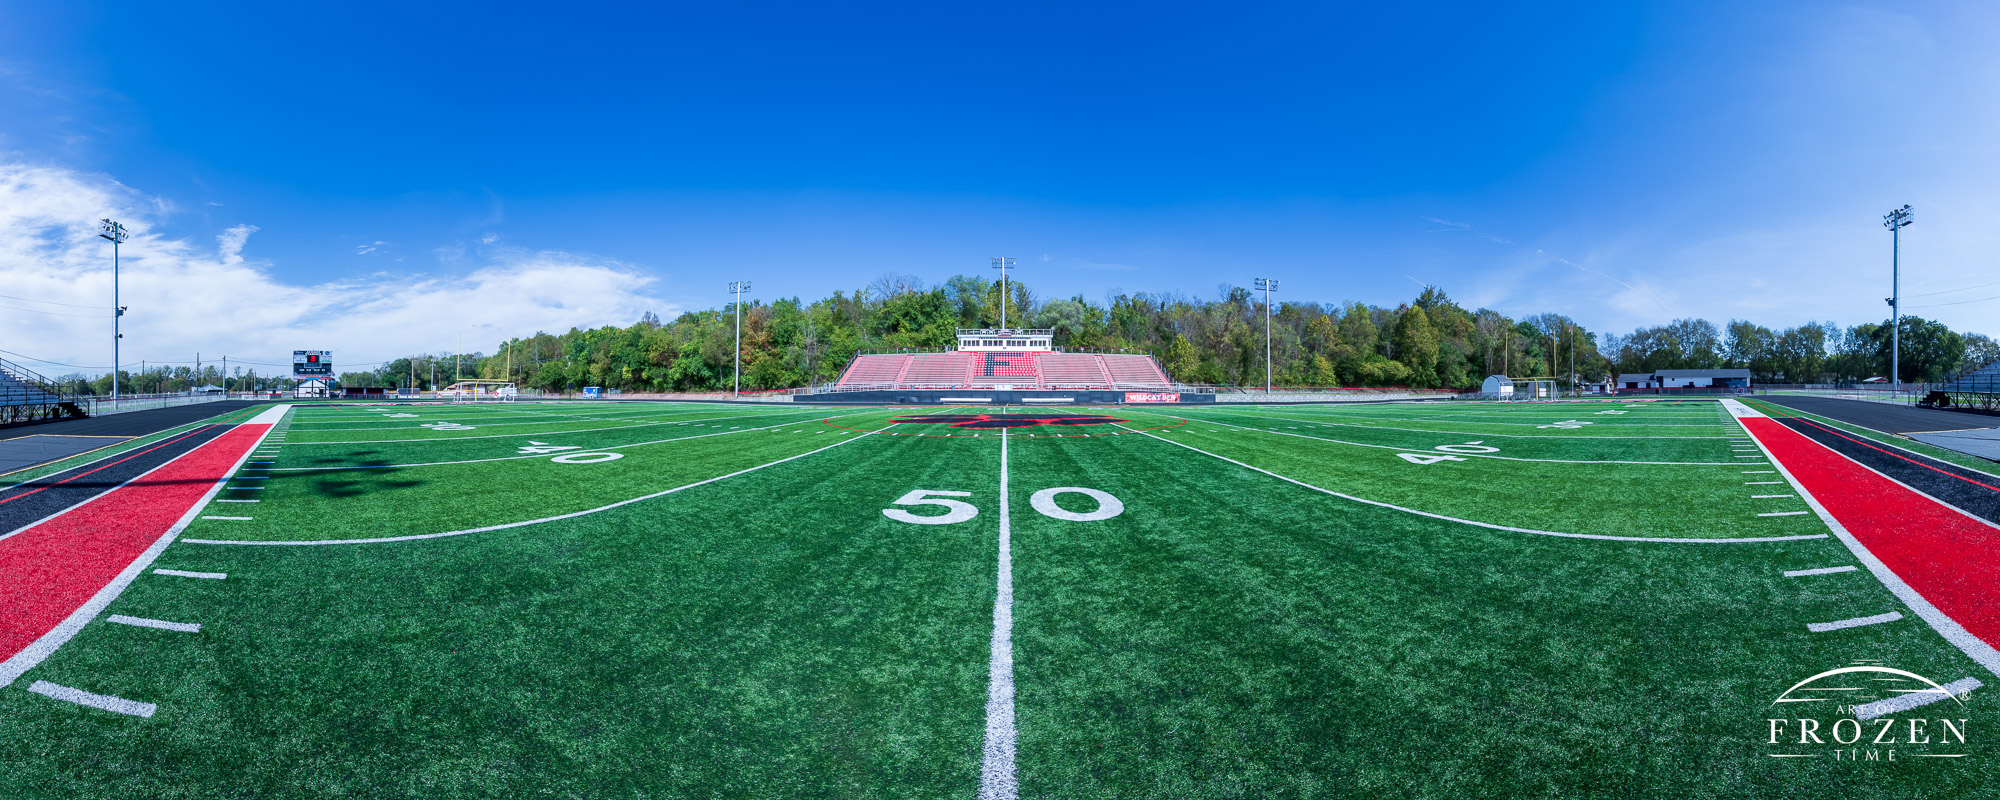 A panorama view of the Franklin High School’s Wildcat stadium from the 50 yard line looking towards the home side bleachers